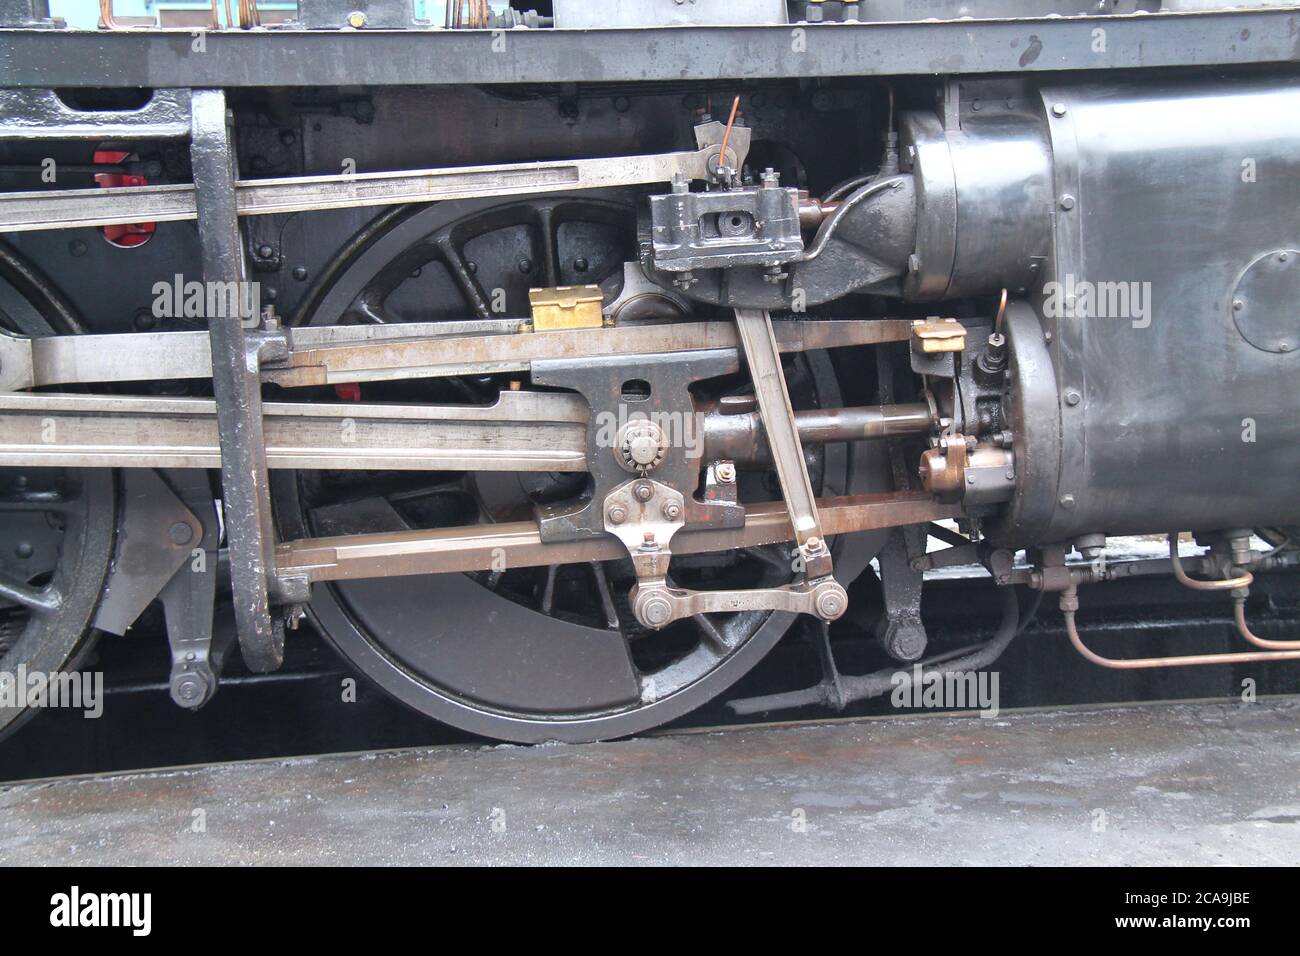 The Wheels and Drive Rods of a Steam Train Engine. Stock Photo